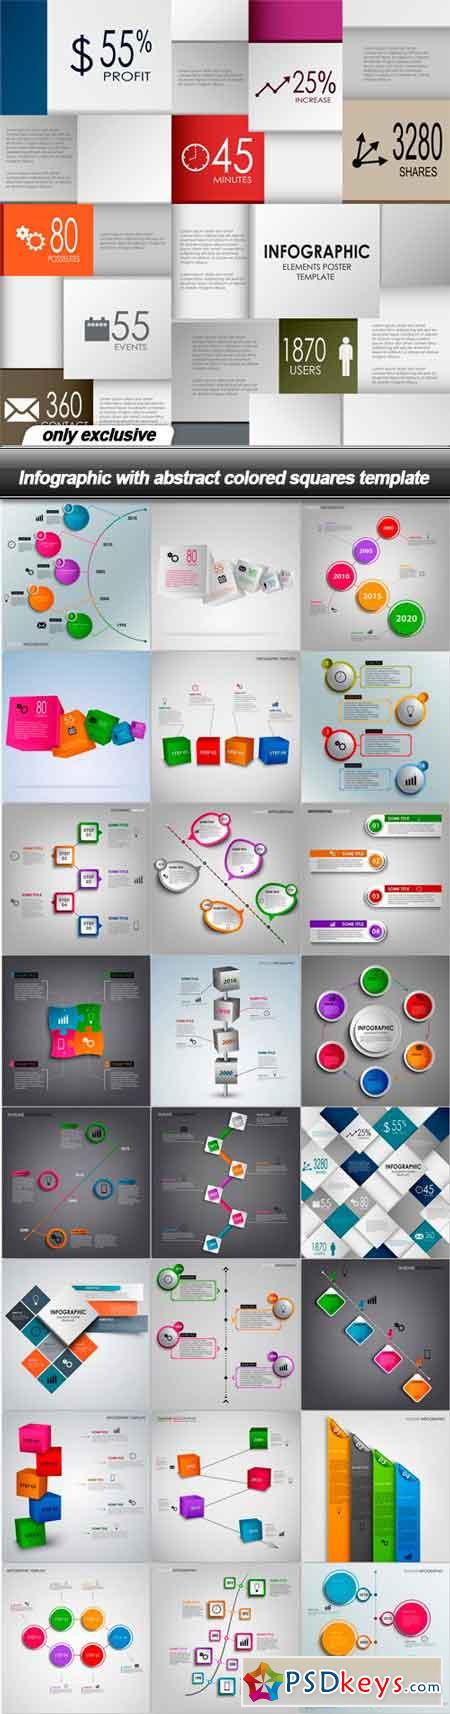 Infographic with abstract colored squares template - 25 EPS